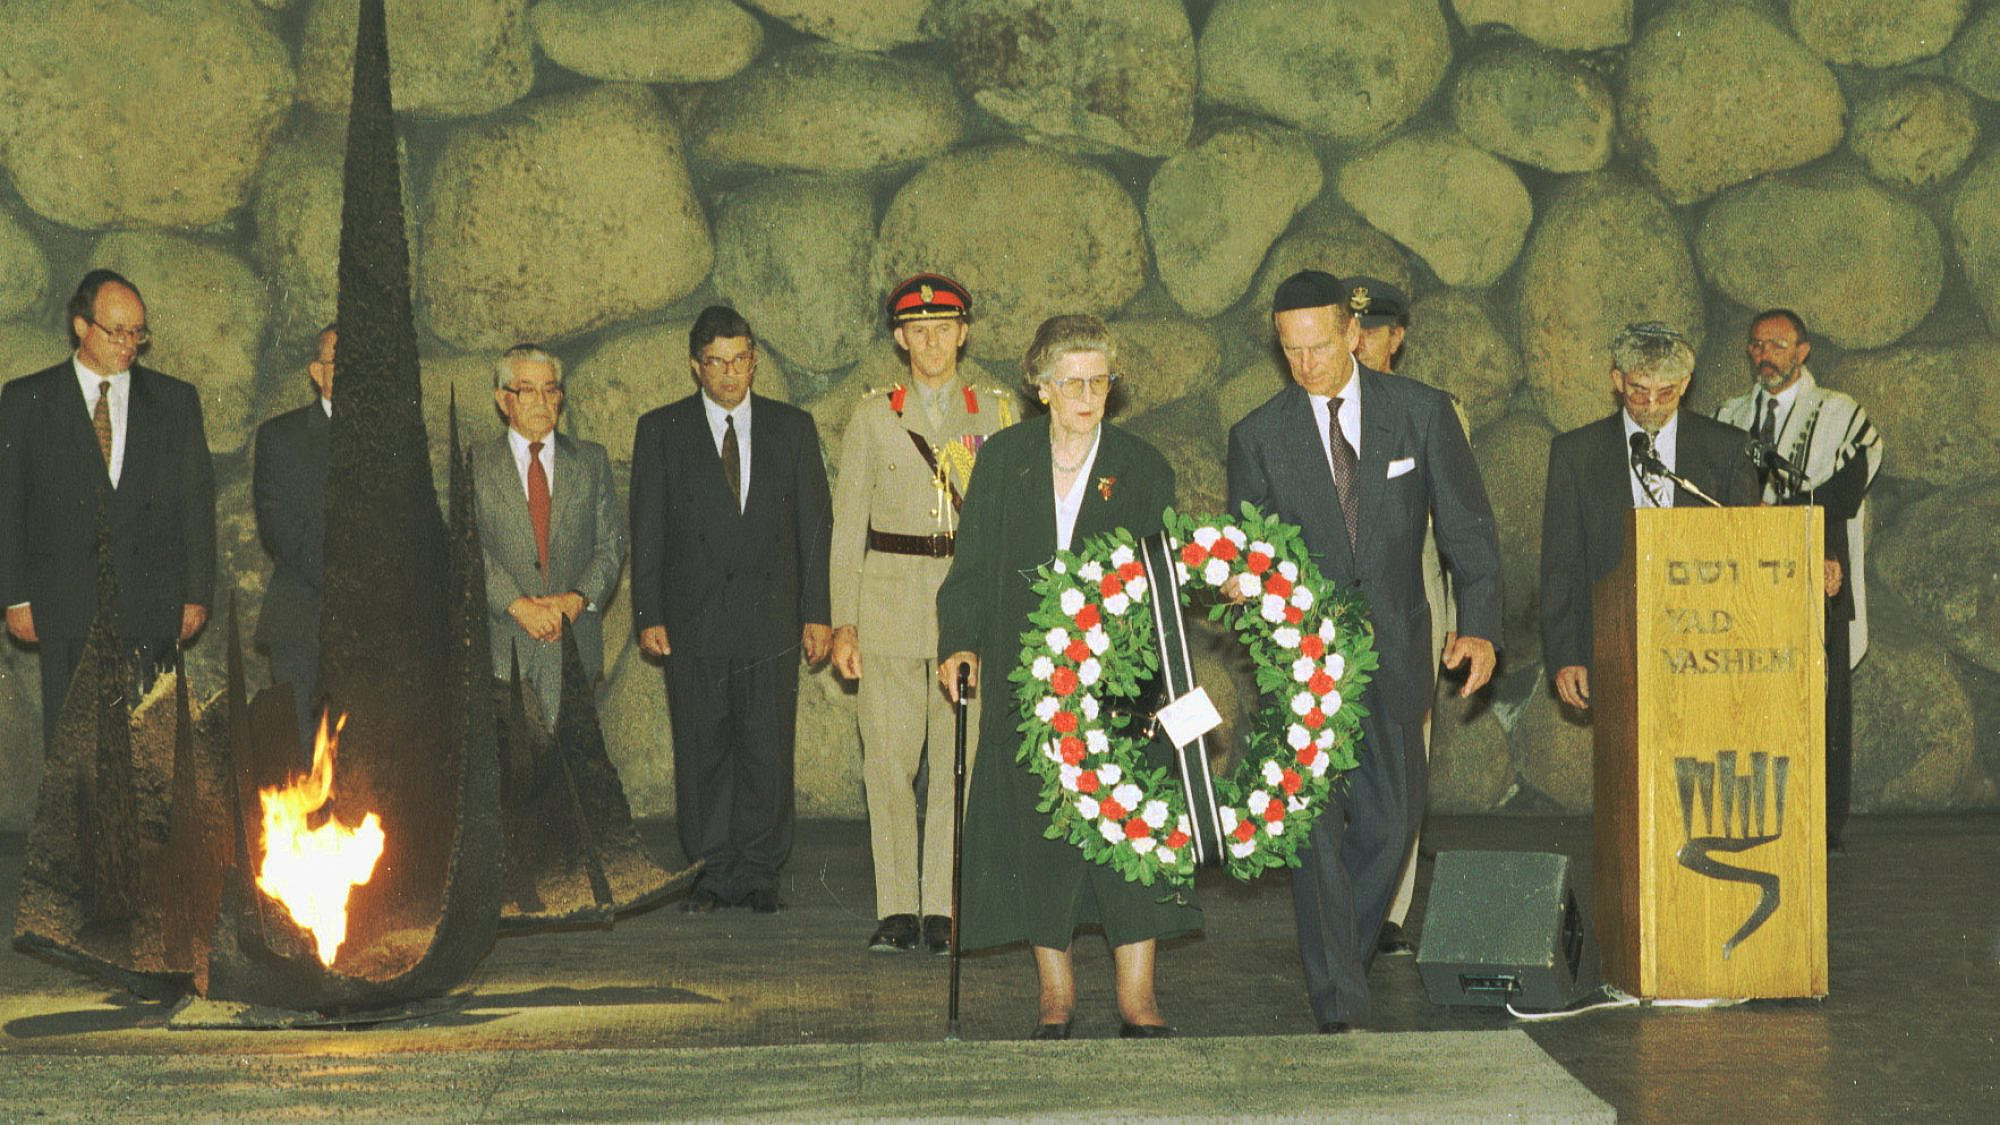 Prince Philip and his sister, Princess Sophie, lay a wreath at Yad Vashem in Jerusalem on Oct. 31, 1994. Credit: Beni Birk/The National Library of Israel.